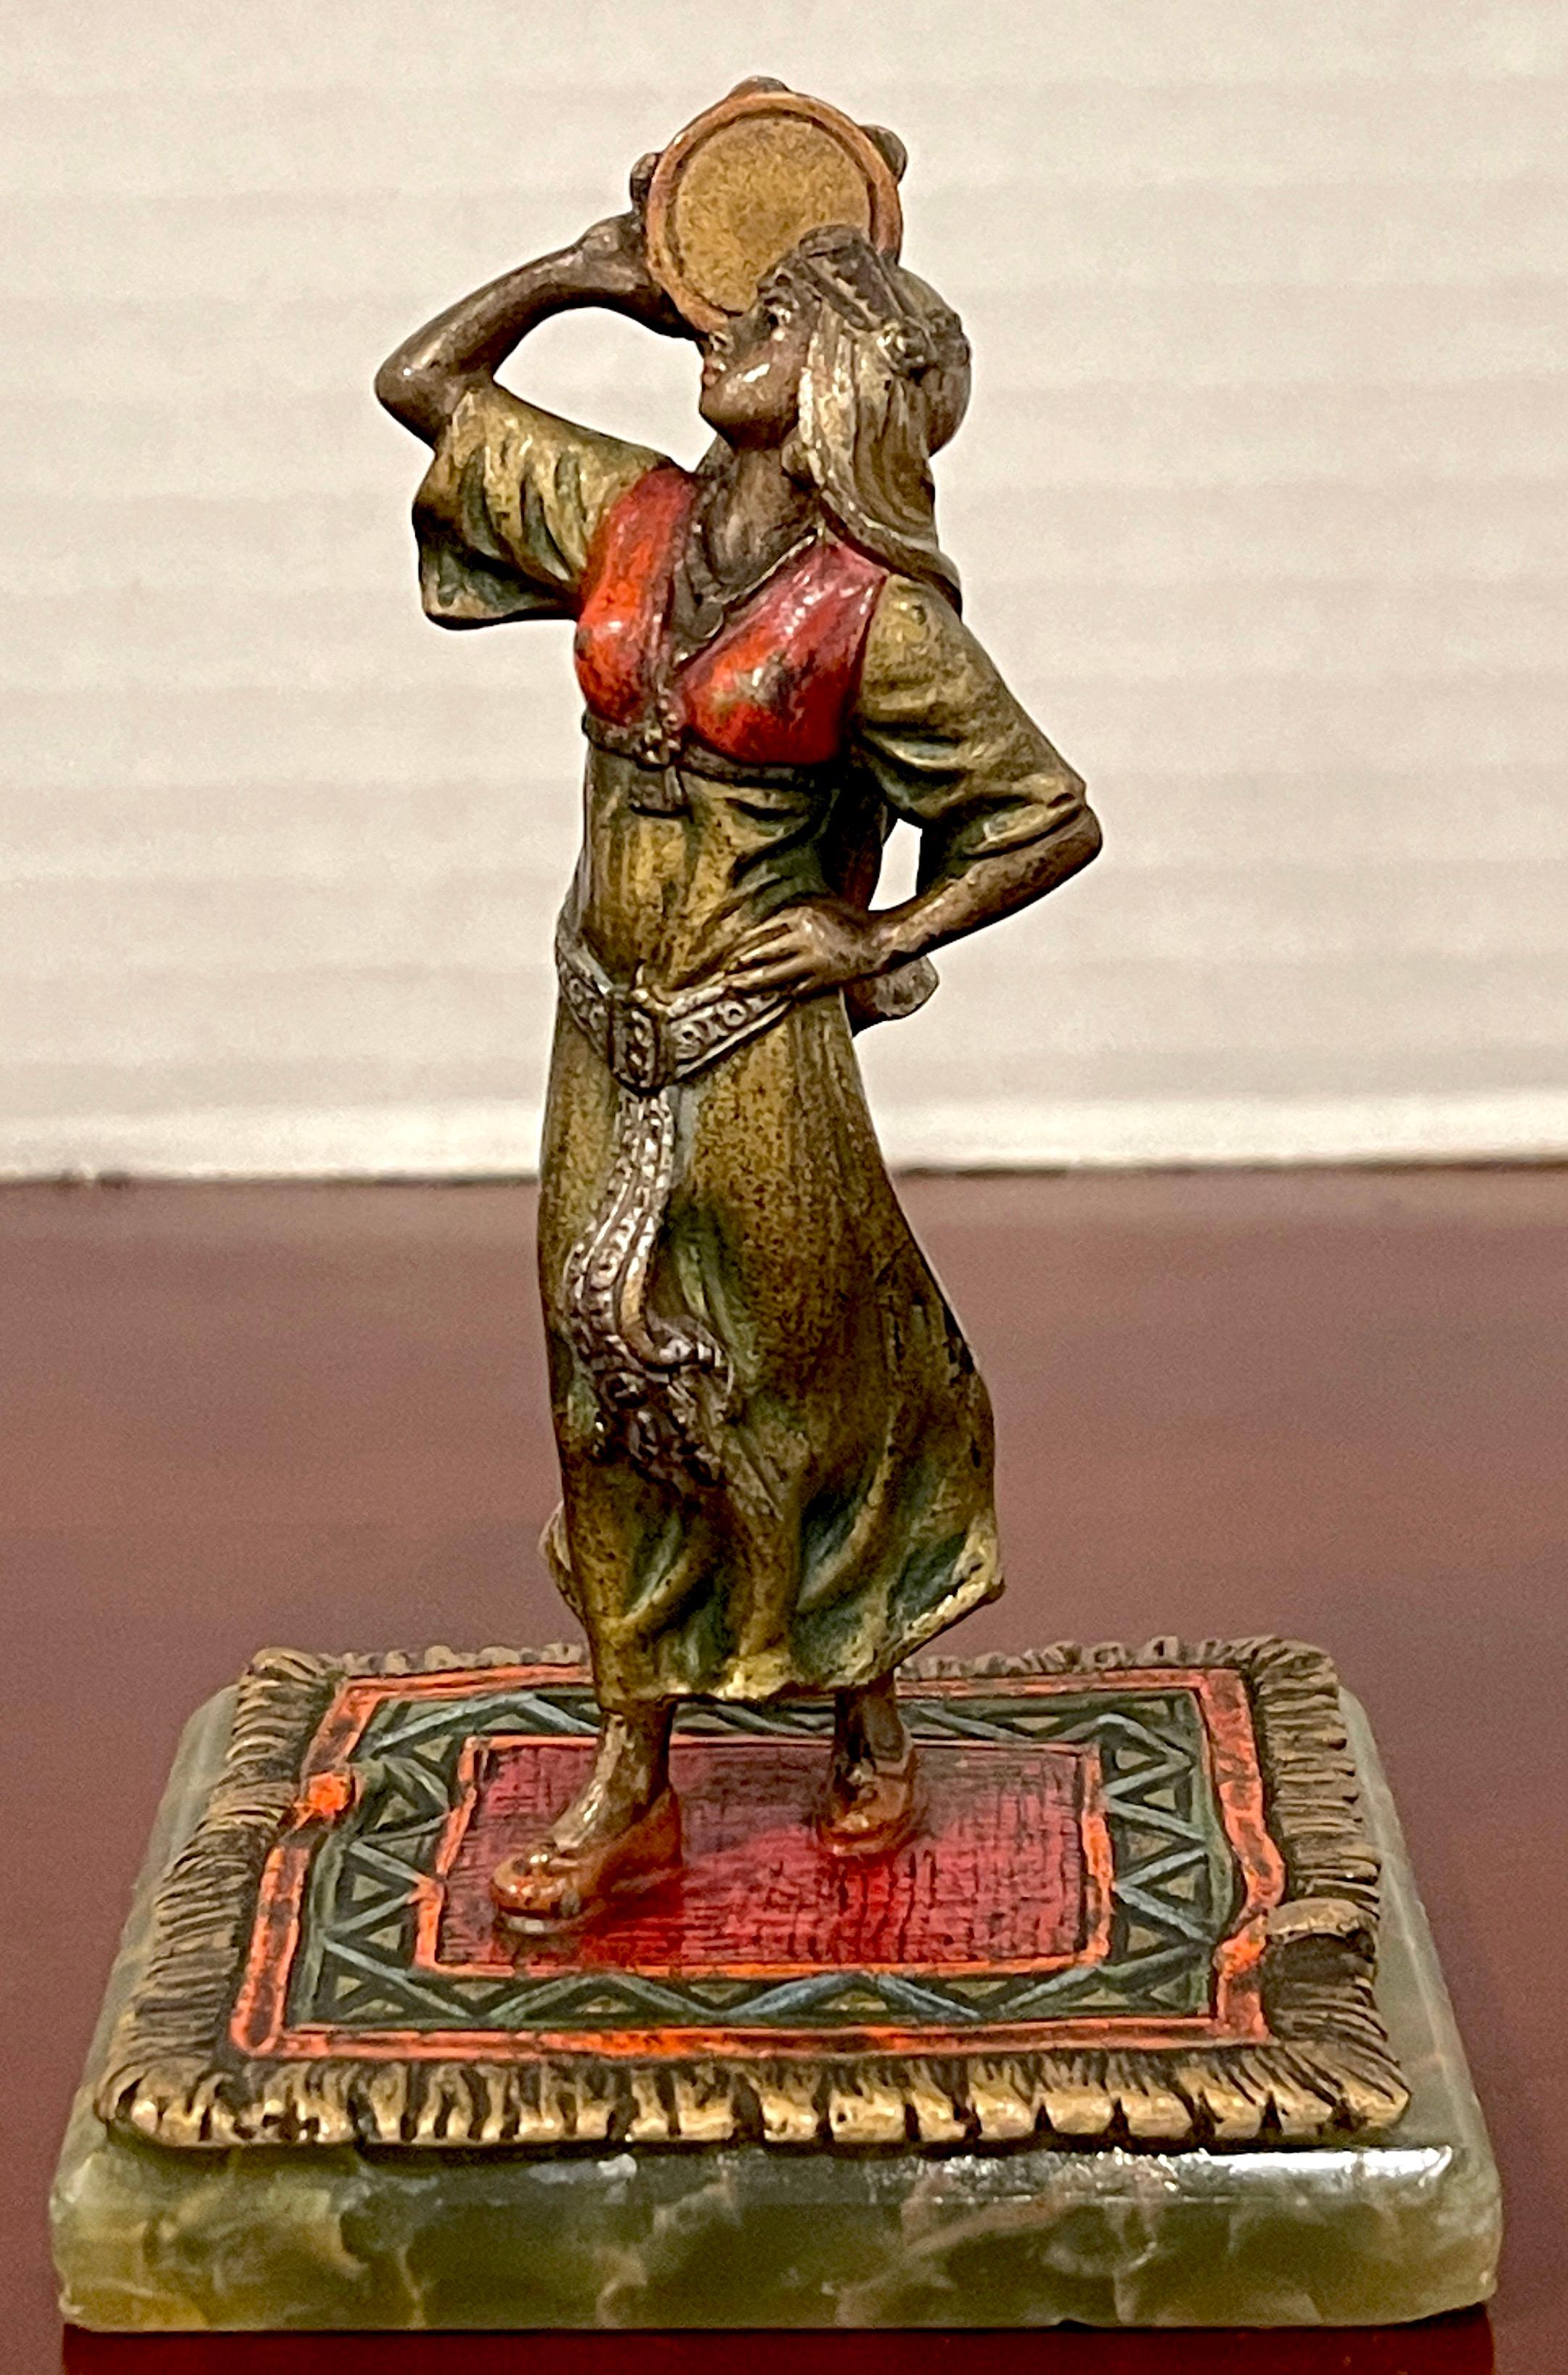 Vienna cold painted bronze 'Carmen' attributed to Bergman, Brilliantly enameled, of a gypsy girl with tambourine standing on a oriental rug, mounted on a conforming green onyx base.